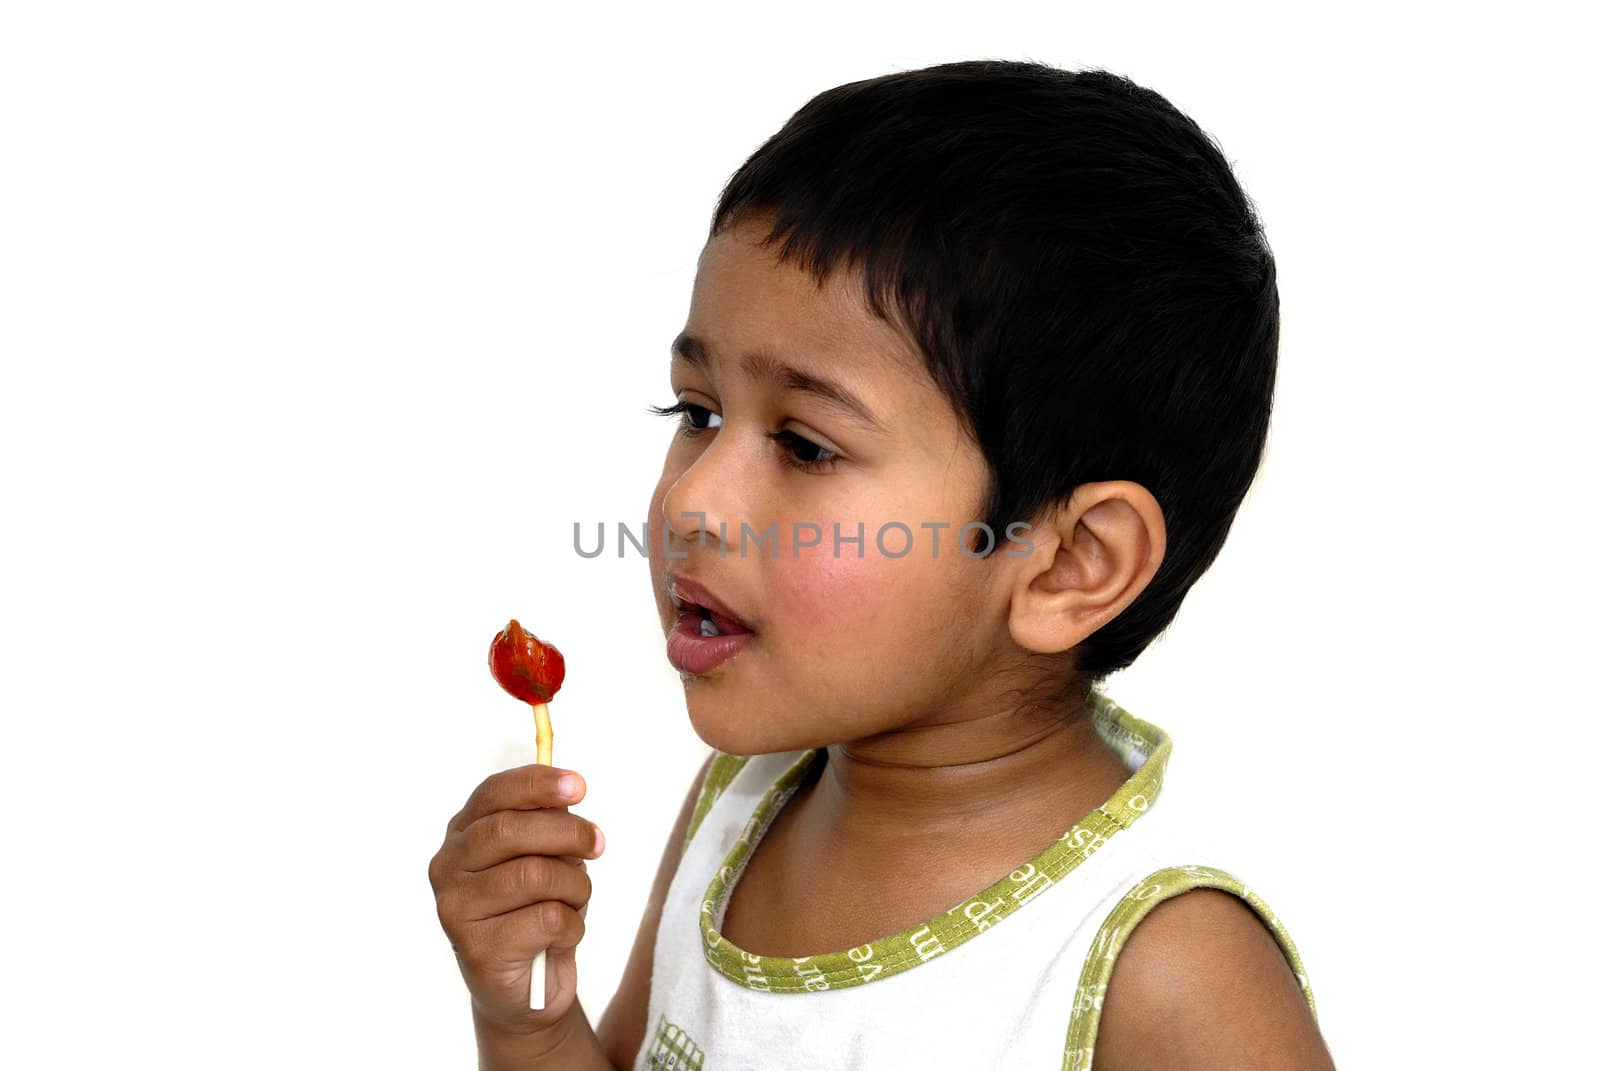 An handsome young Indian kid sucking on a lollypop